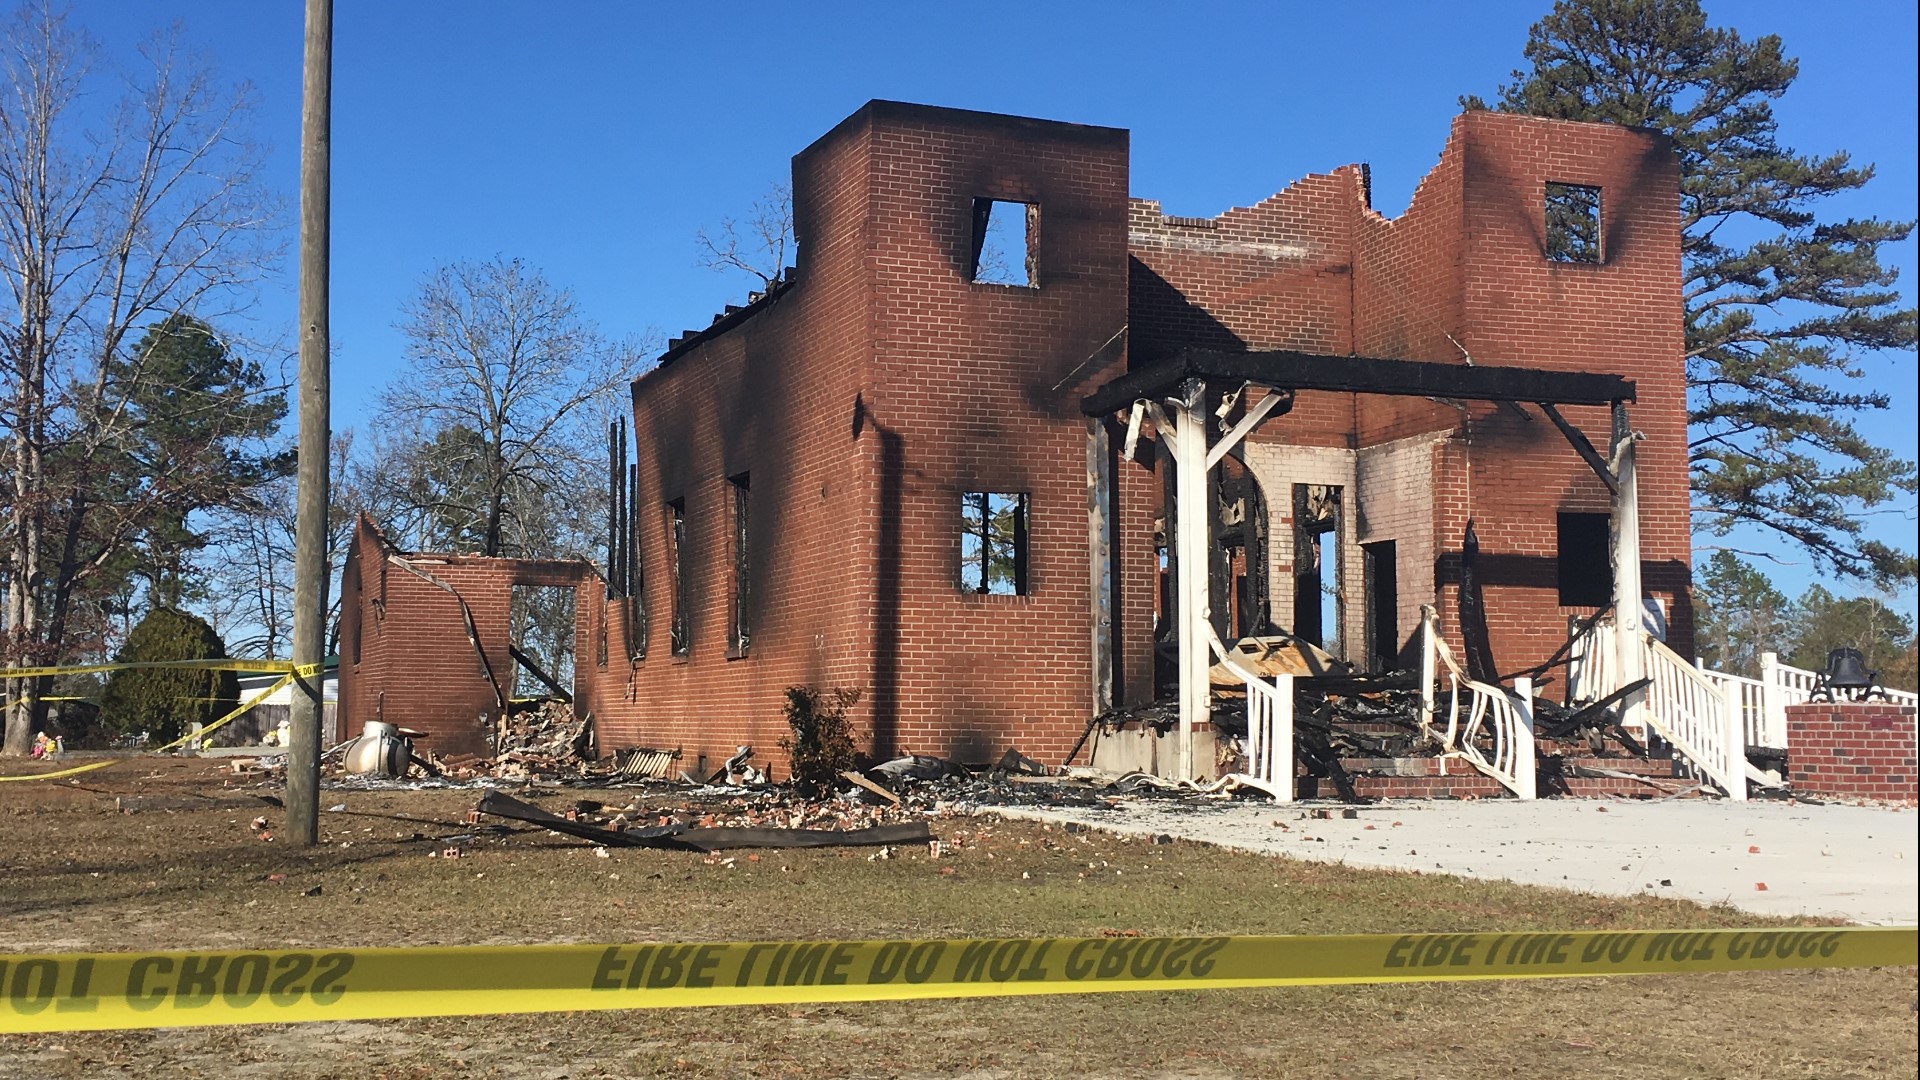 The fire happened over the weekend, but investigators were out looking at the building Tuesday.